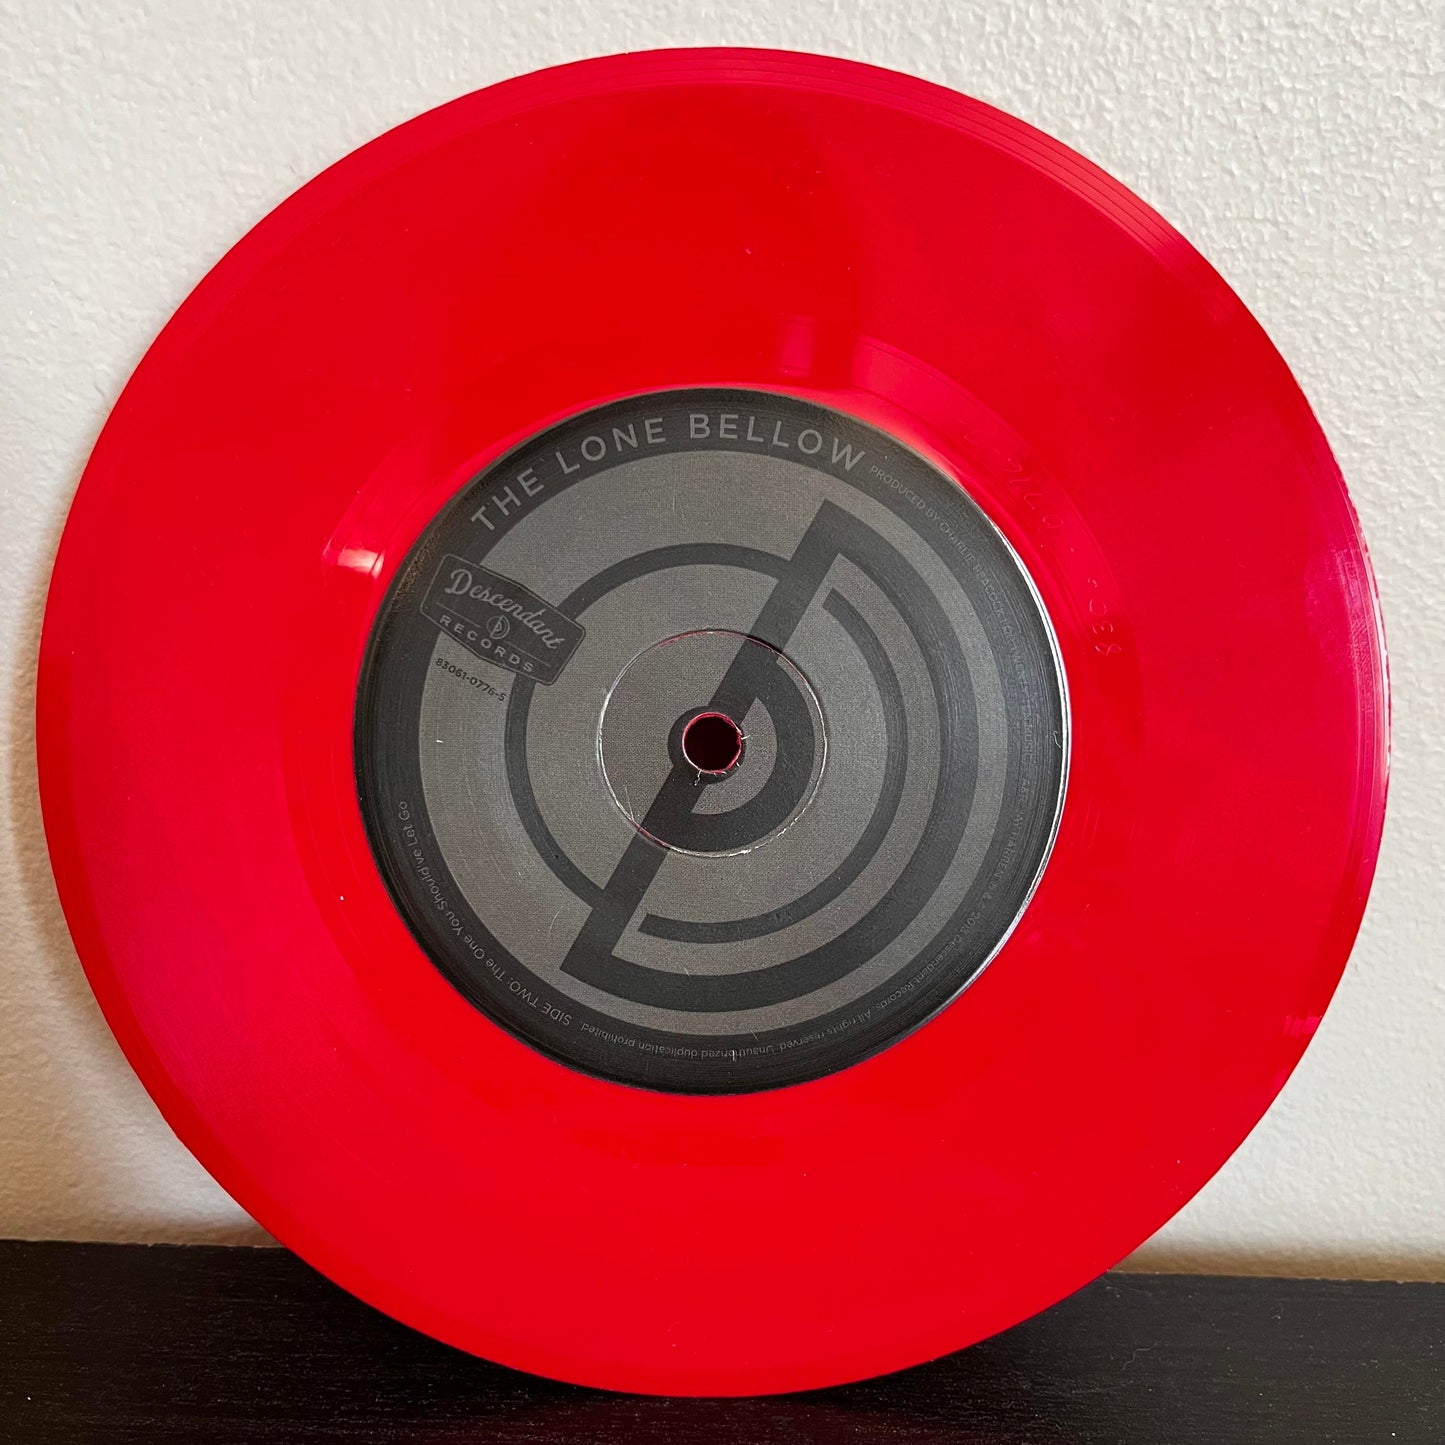 The Lone Bellow 7" 45 RPM Red Vinyl VG